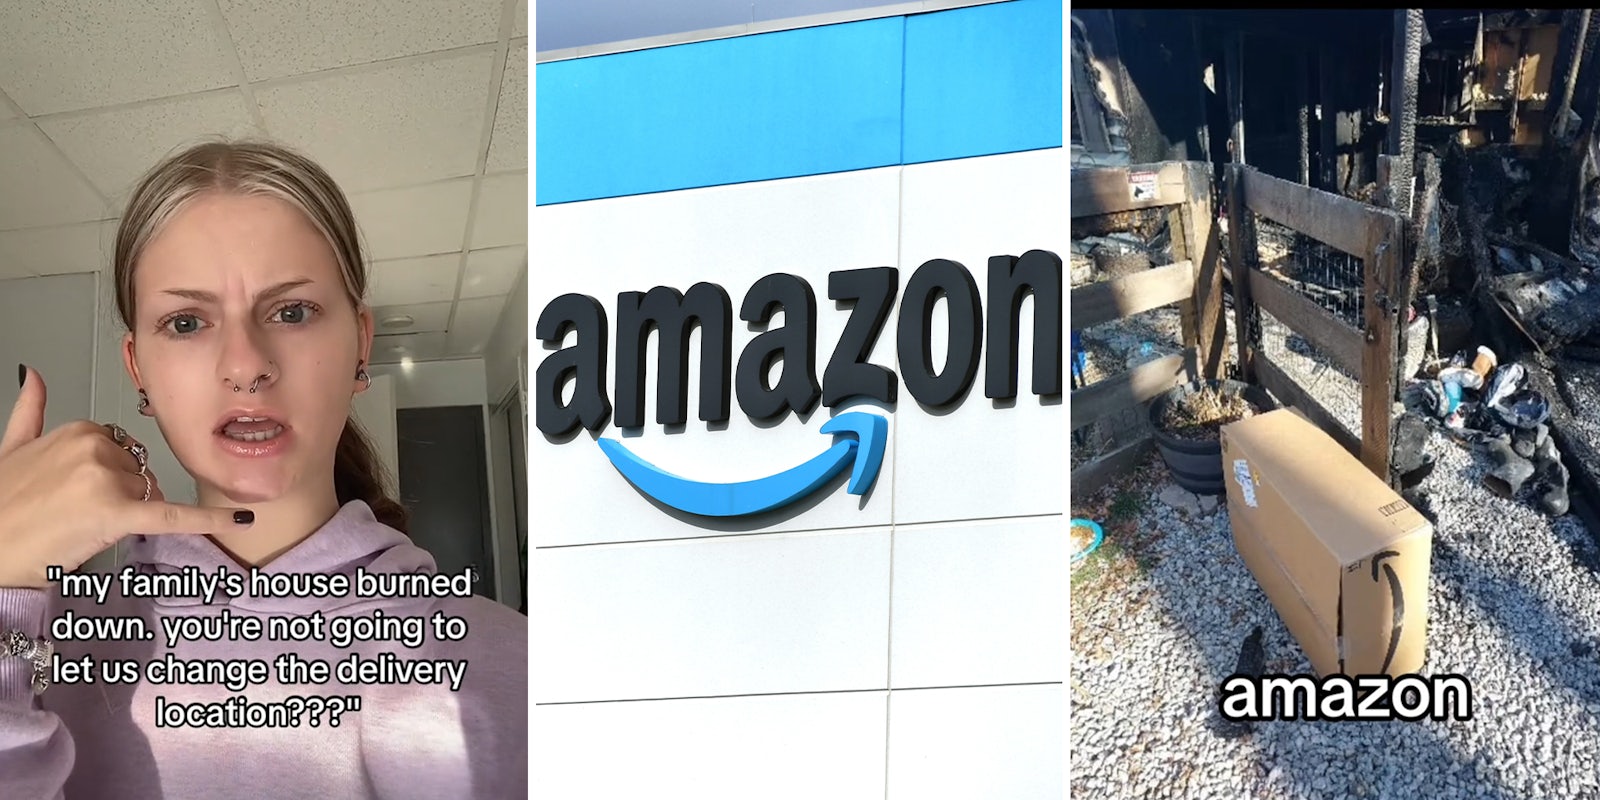 Customer tells Amazon her house burned down. They delivered the package there anyway